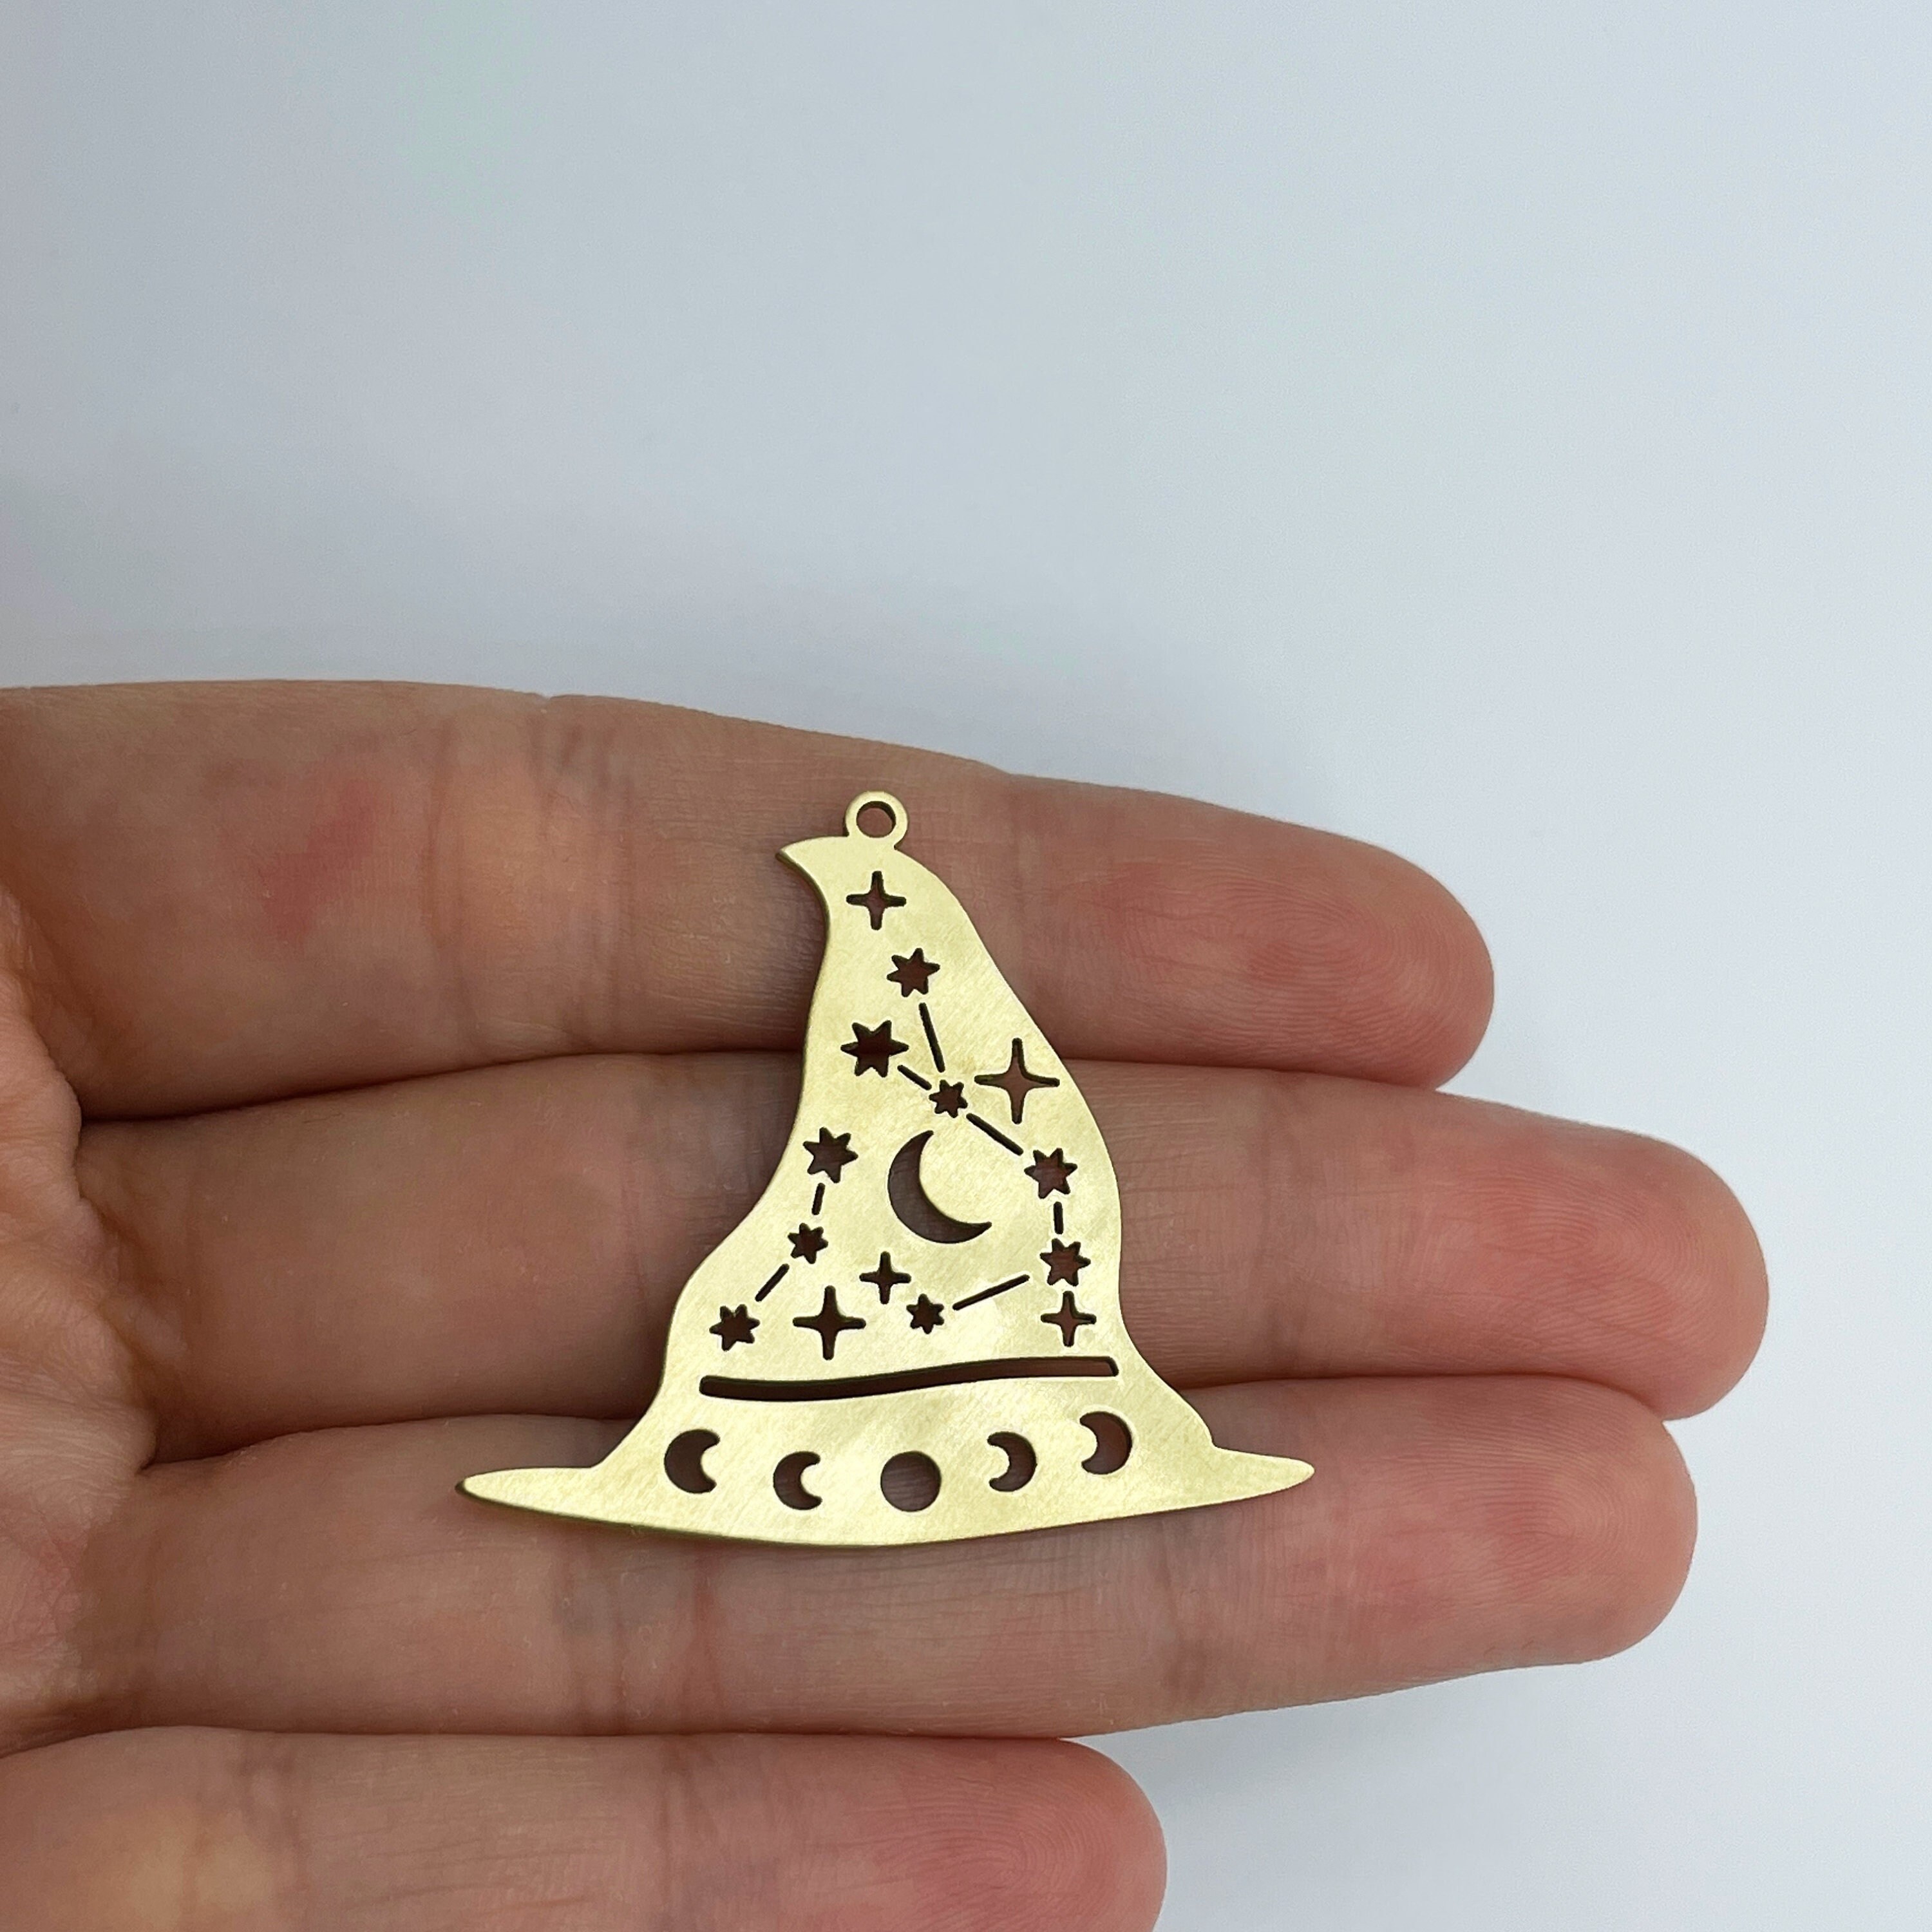 2pcs Raw Brass Witch Hat Charm, Moon Phases Witch Hat Charm, Halloween Charms, Witchy Charms, Laser Cut Jewelry Making Supplies RW-1569